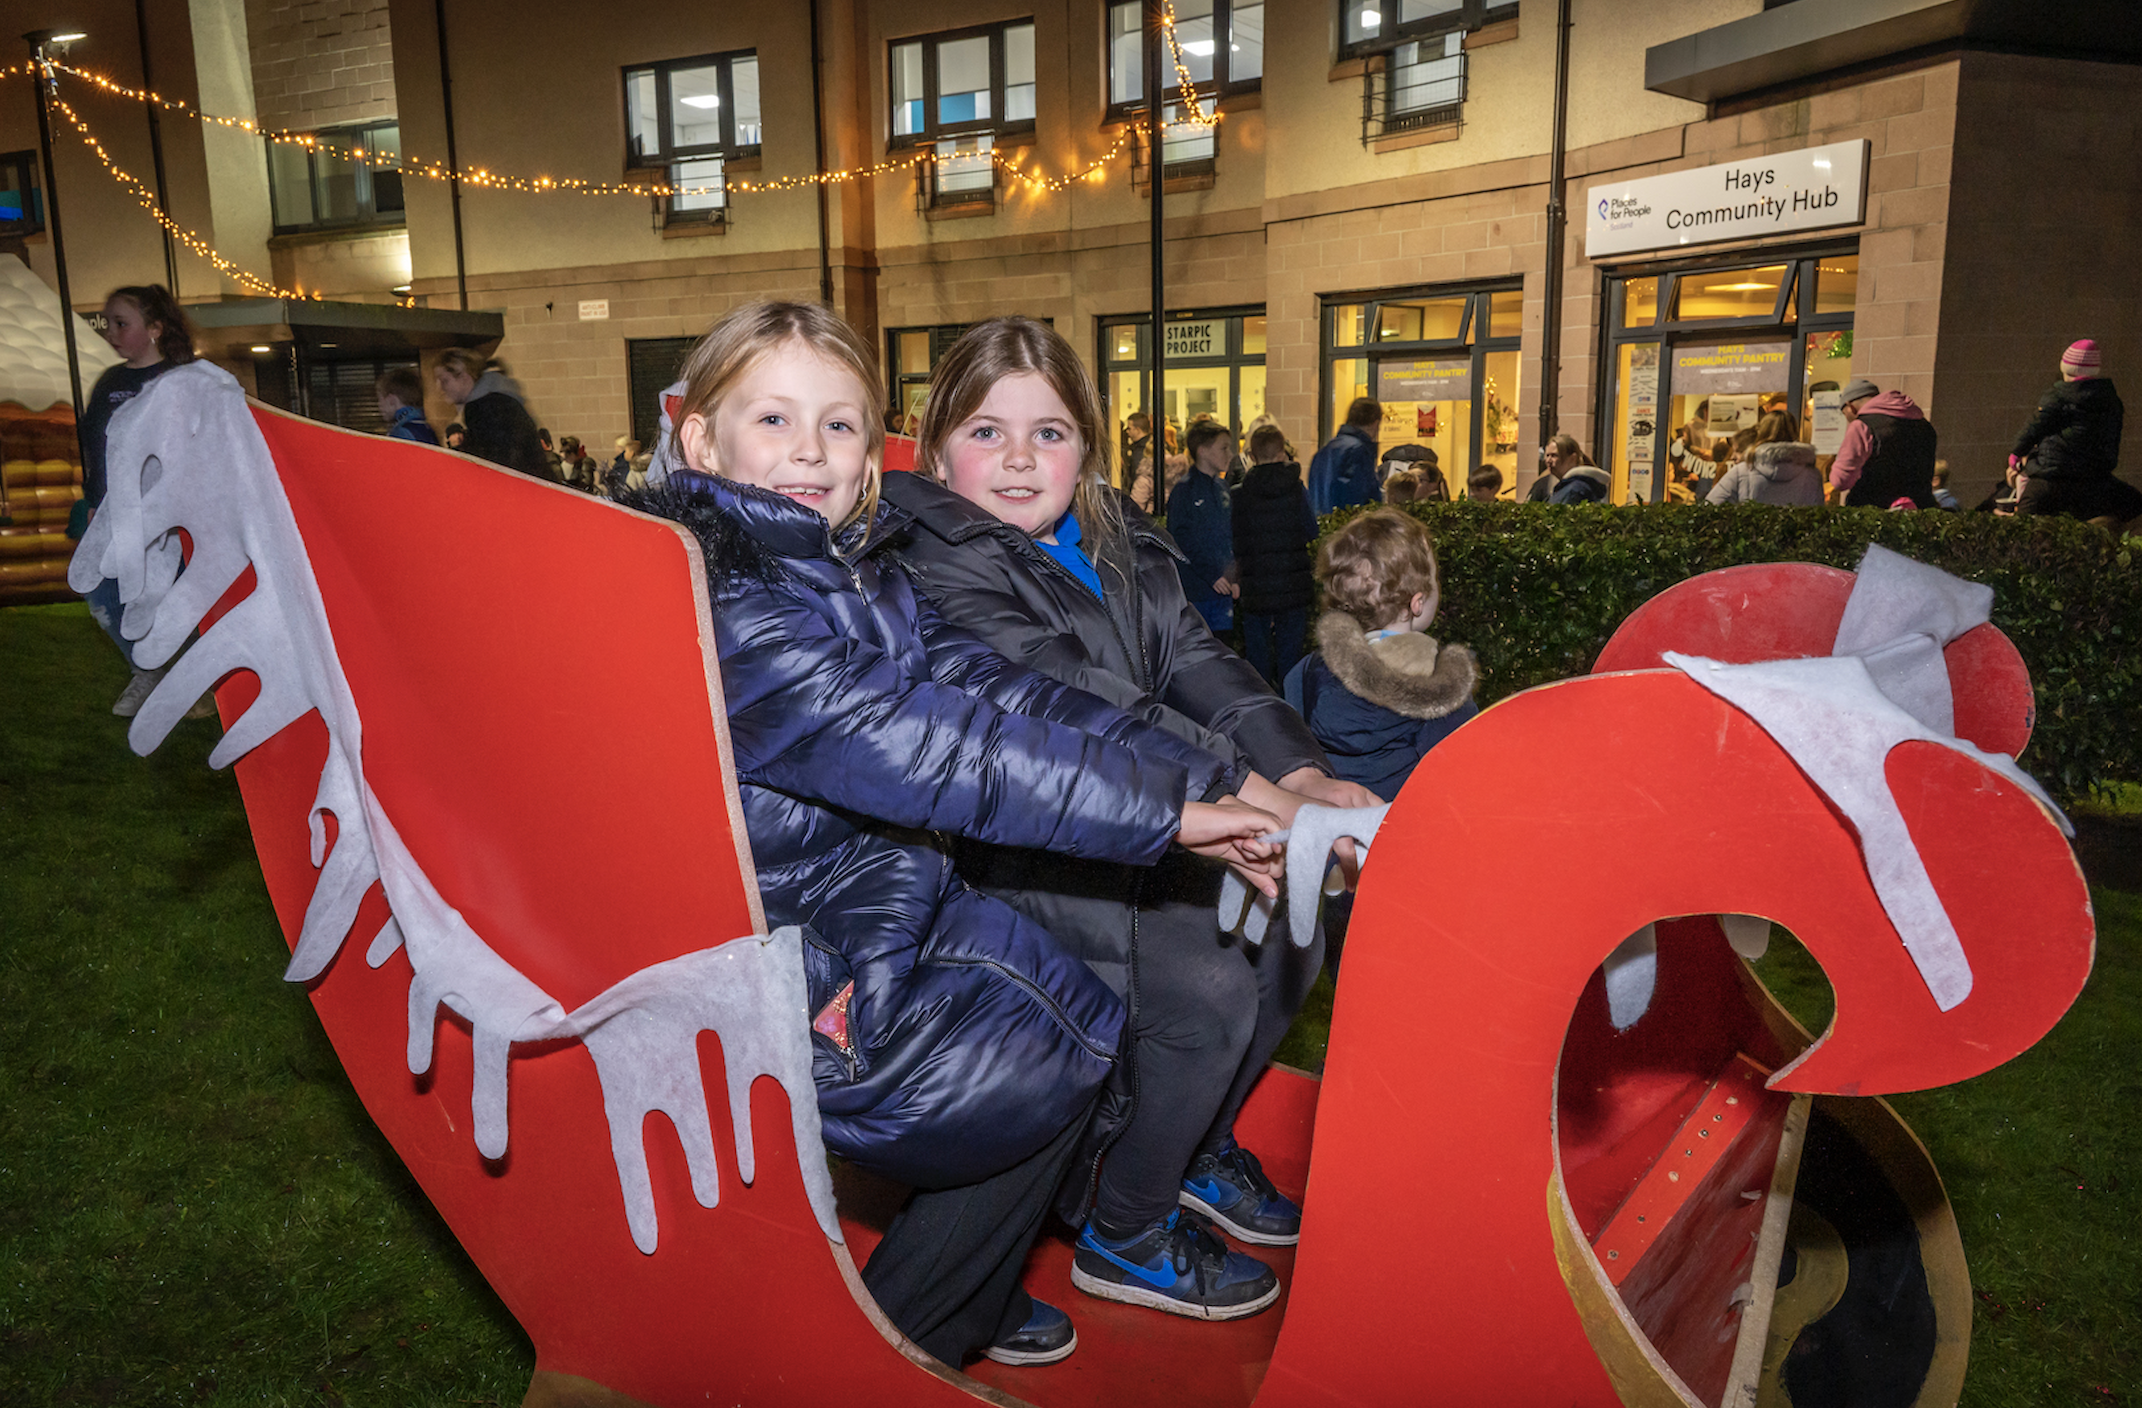 Places for People Scotland kicks off Christmas in Craigmillar